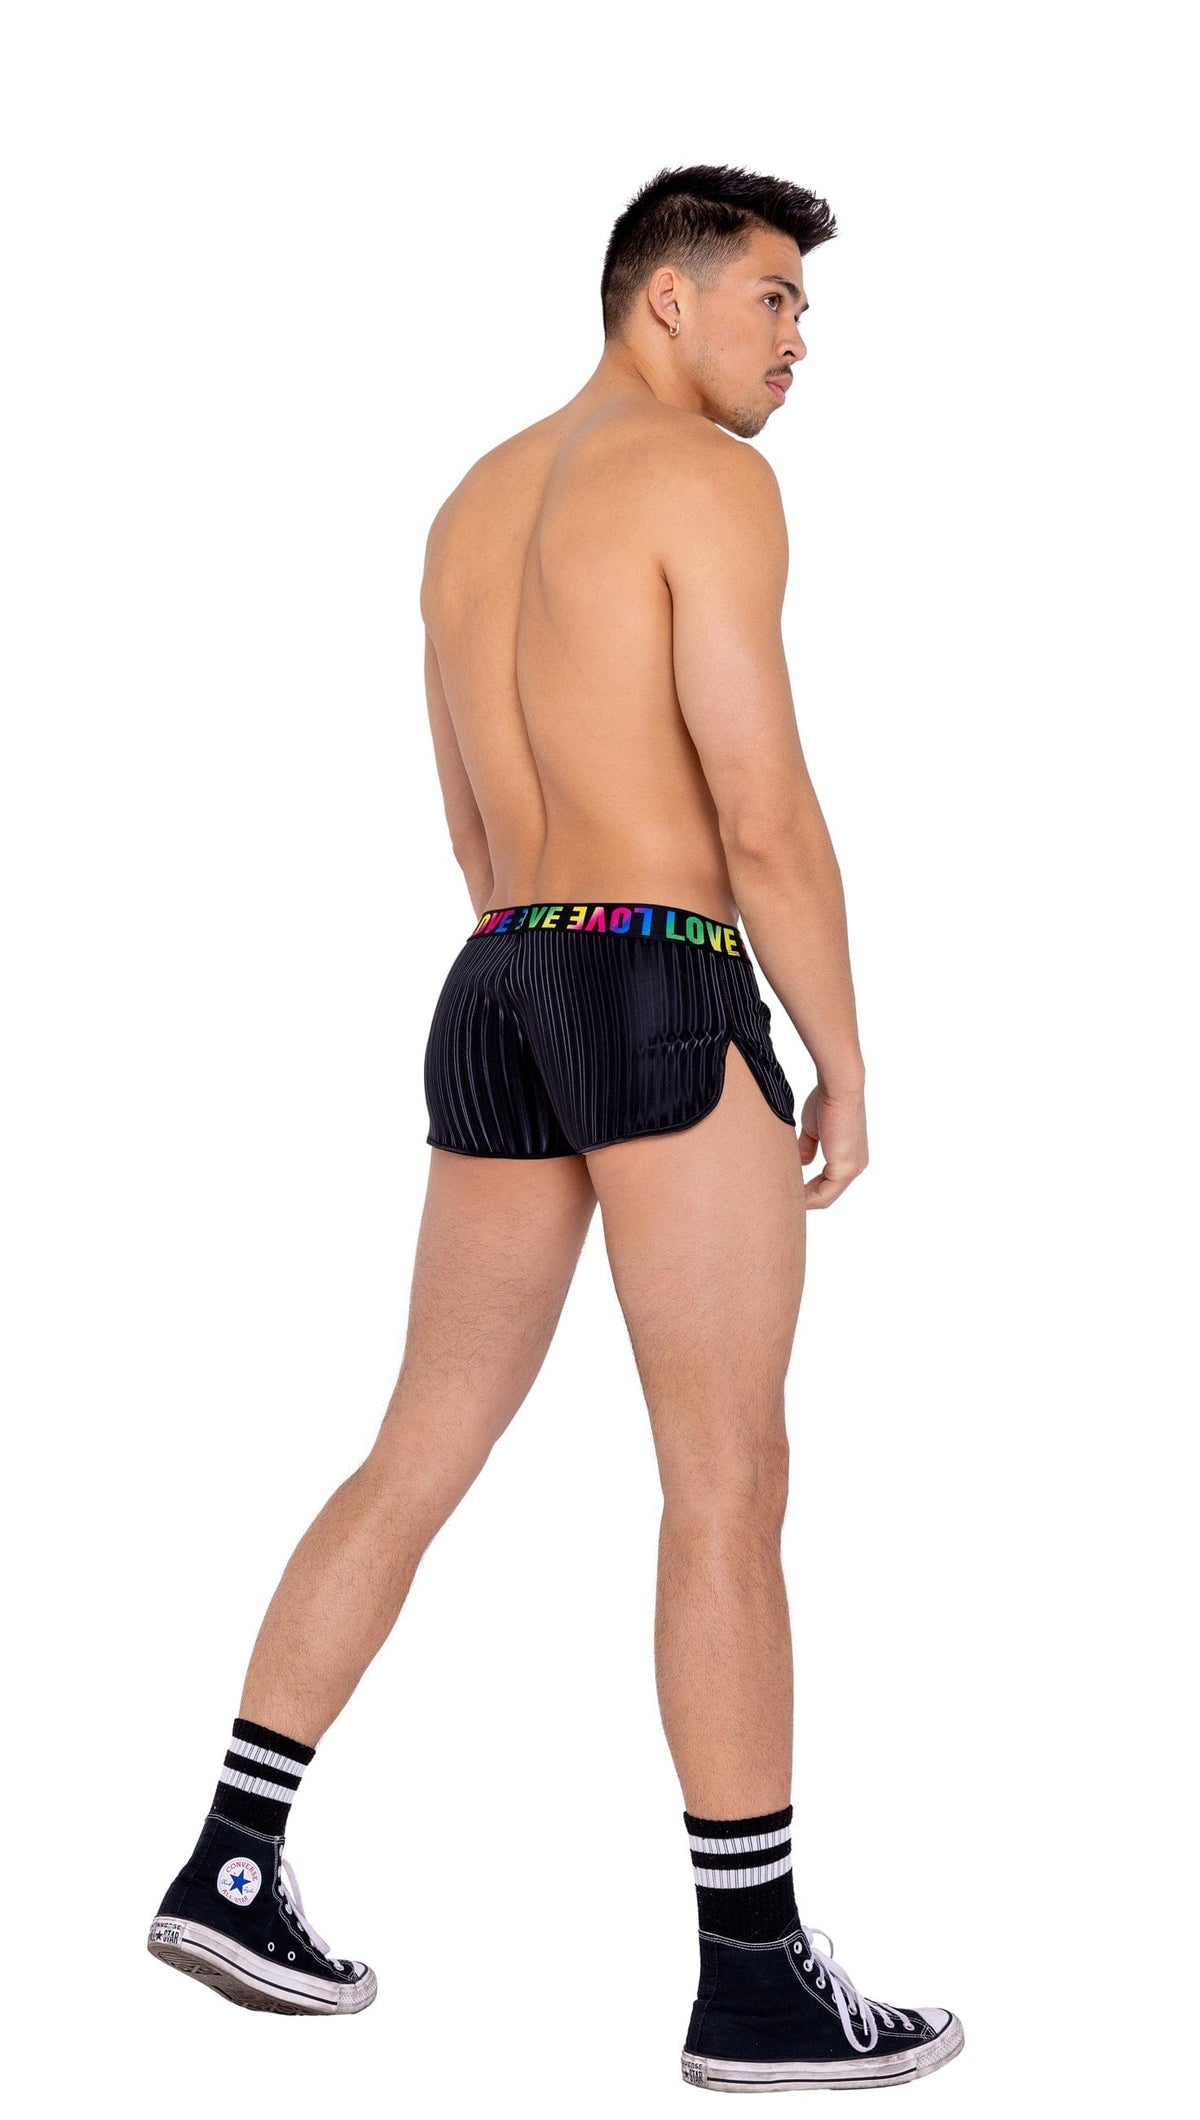 Roma Black Men’s Pride w/ LOVE Elastic Band Runner Shorts 2022 Black Men’s Pride Attached Garters Chain Detail Thong Ravewear Apparel &amp; Accessories &gt; Clothing &gt; Shirts &amp; Tops